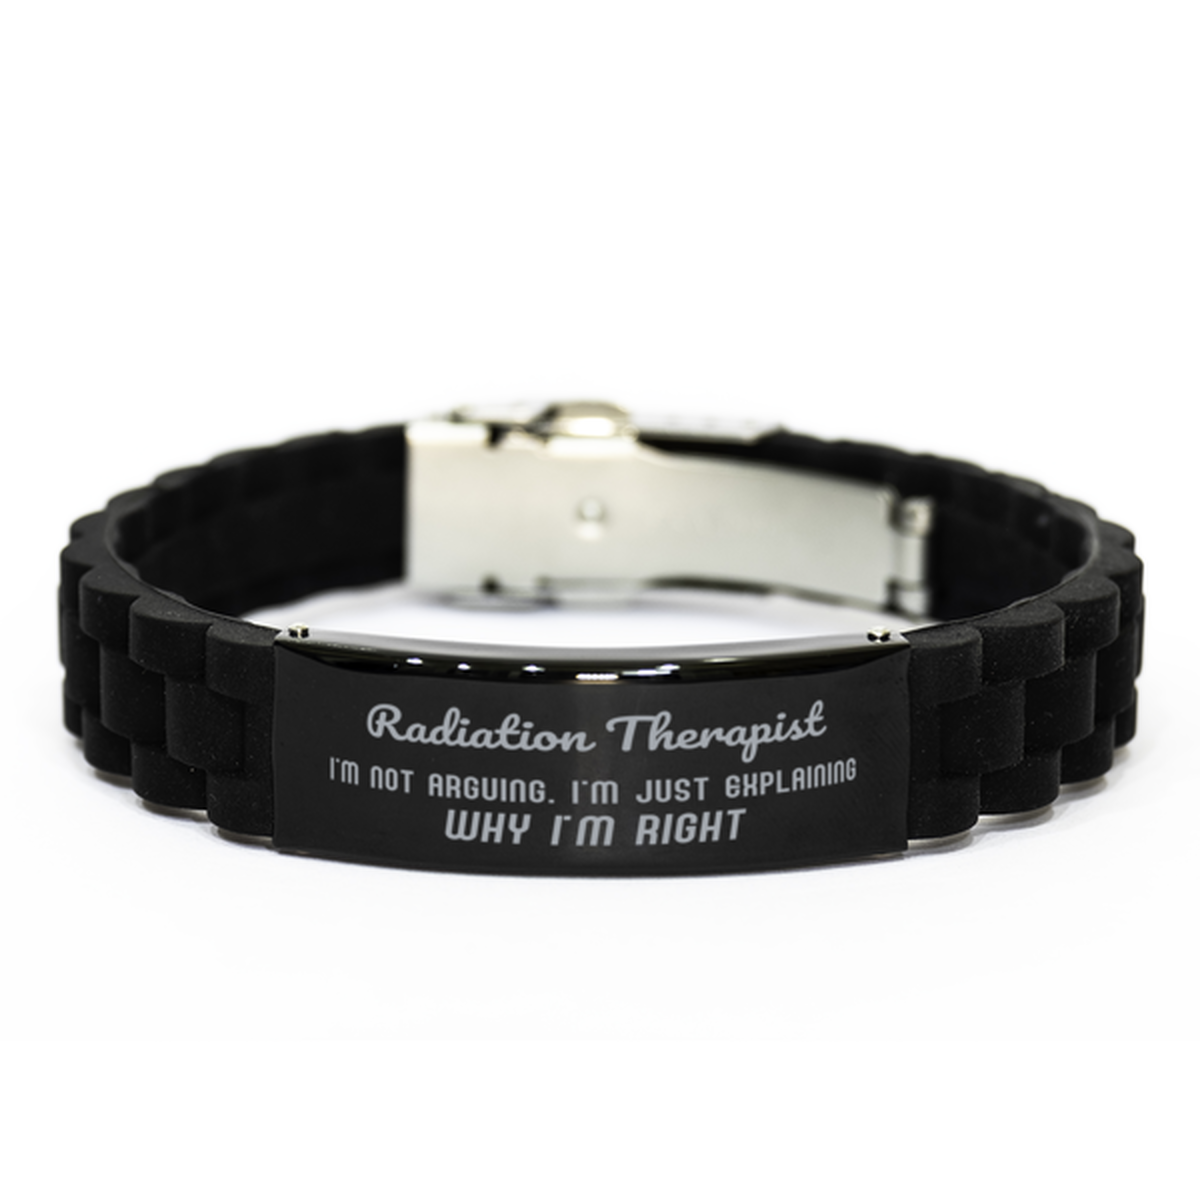 Radiation Therapist I'm not Arguing. I'm Just Explaining Why I'm RIGHT Black Glidelock Clasp Bracelet, Funny Saying Quote Radiation Therapist Gifts For Radiation Therapist Graduation Birthday Christmas Gifts for Men Women Coworker